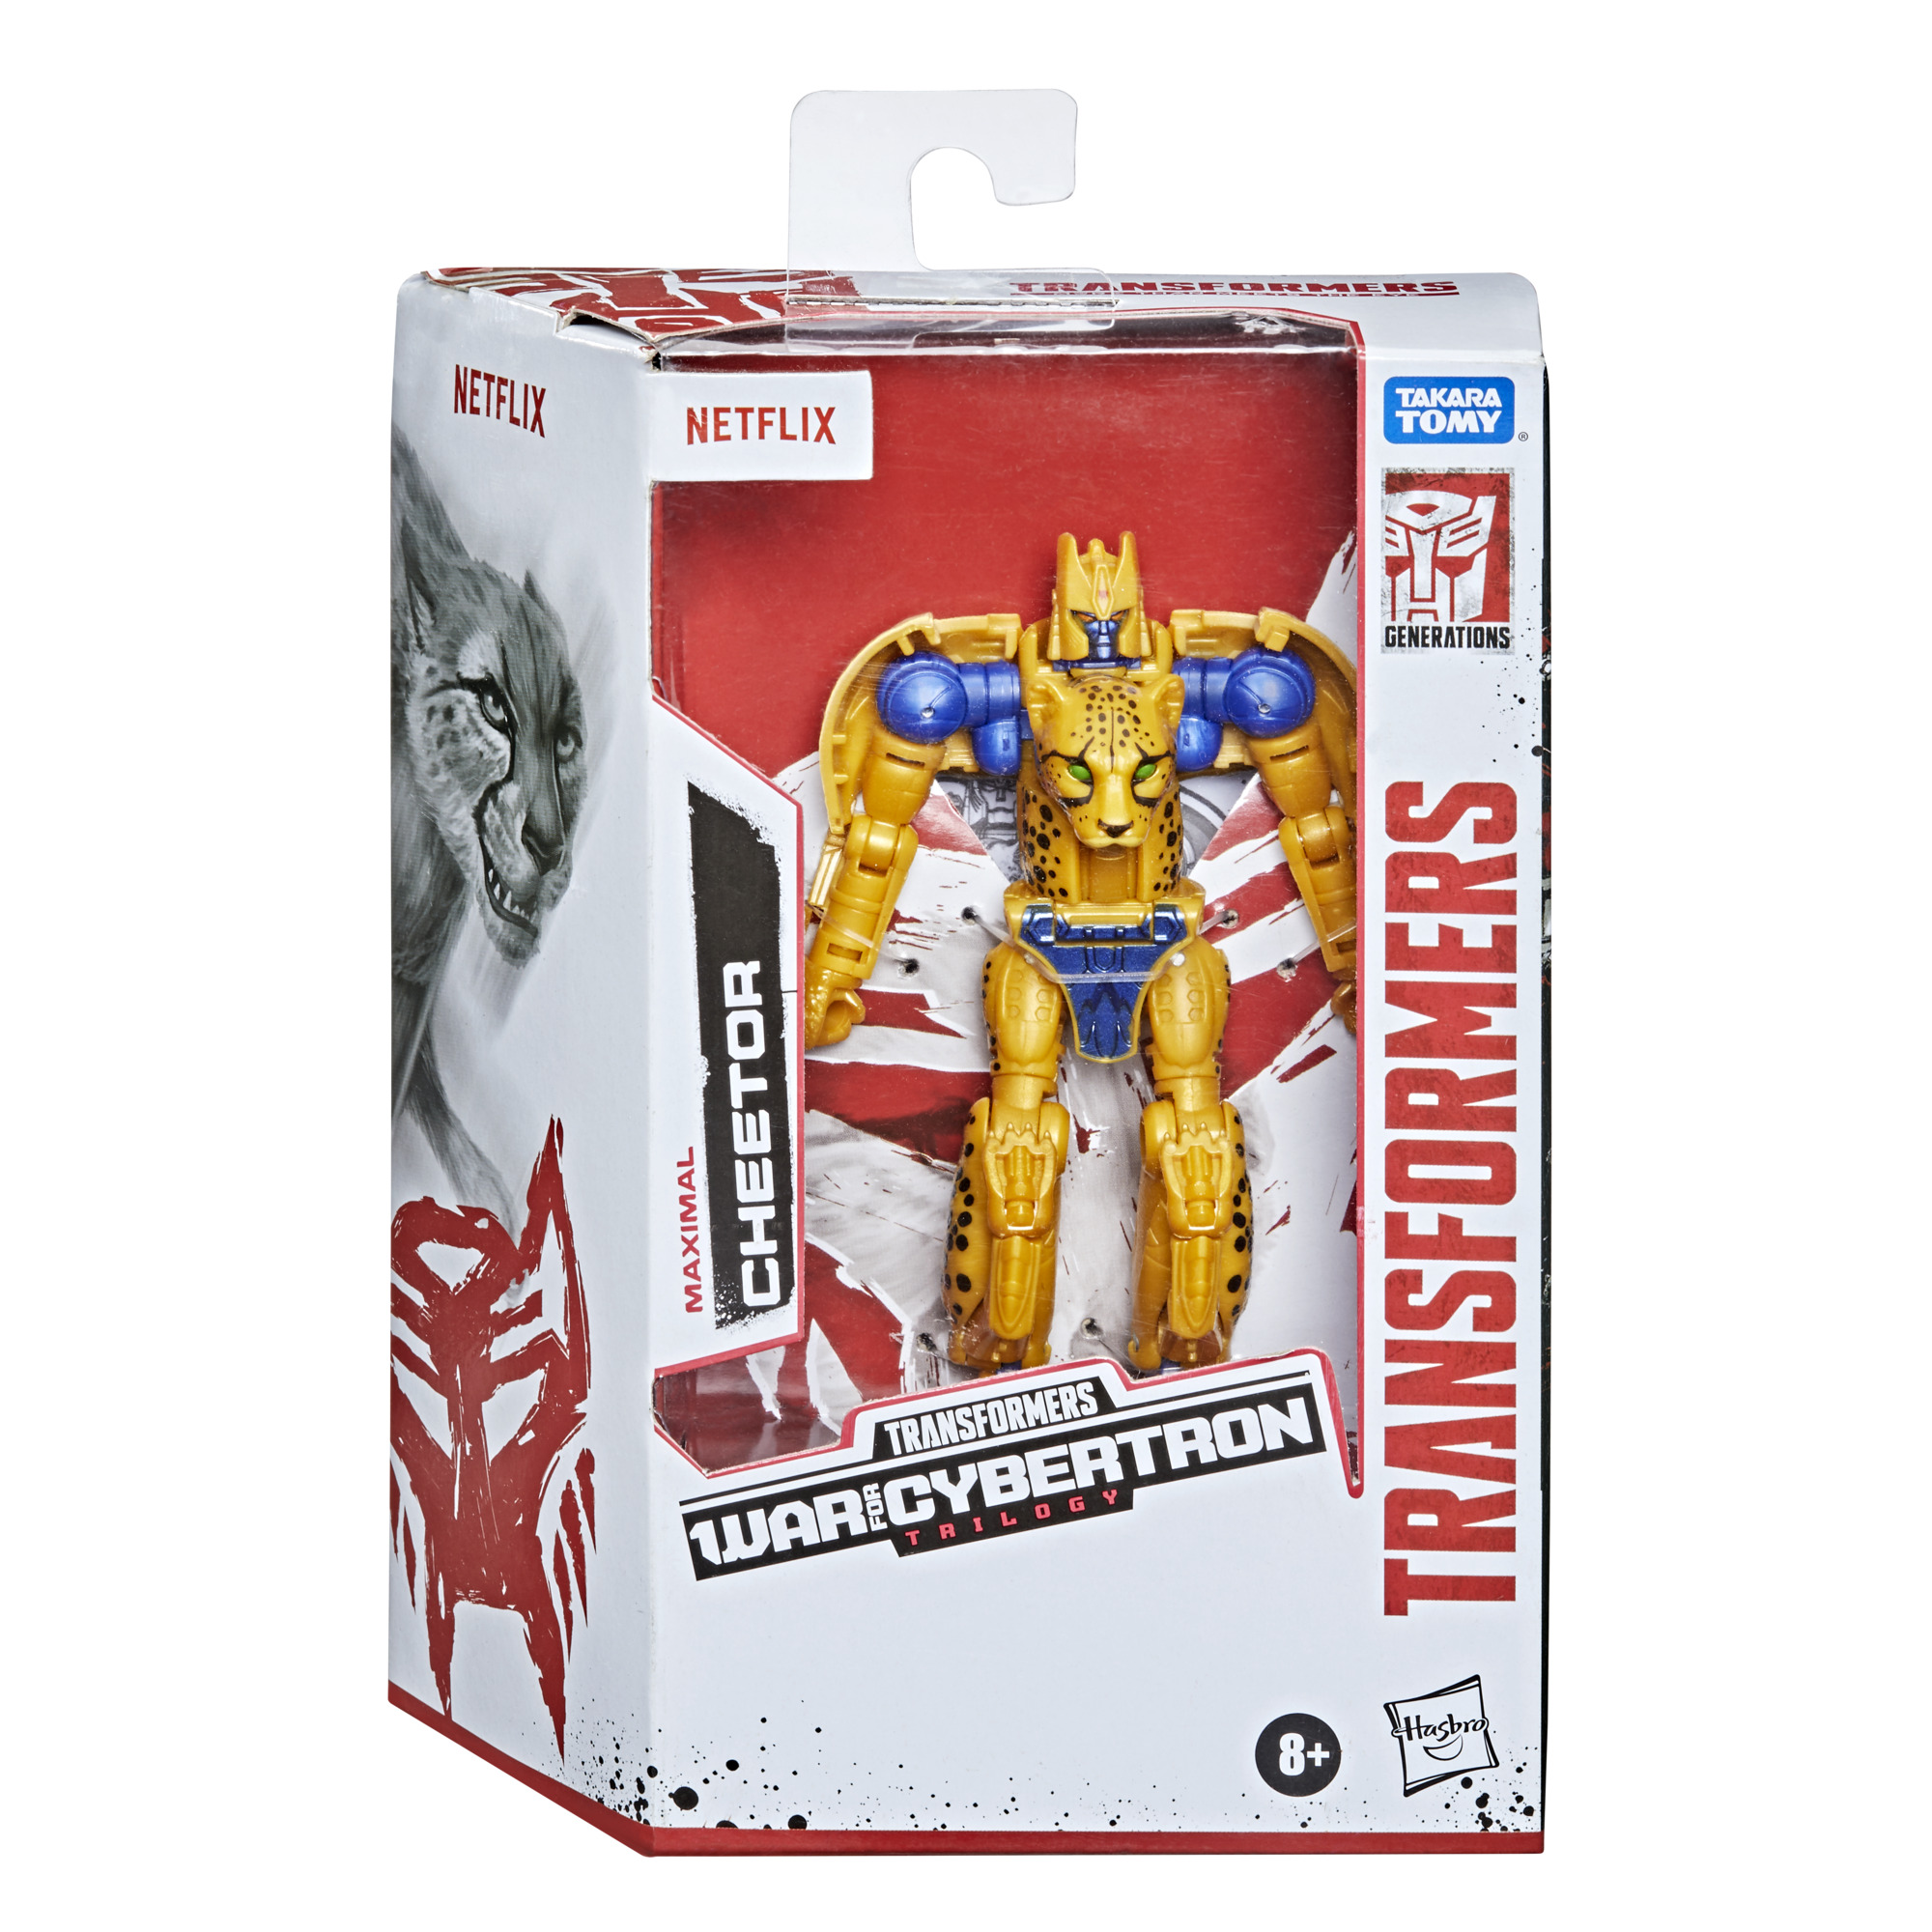 Transformers: War for Cybertron Cheetor Kids Toy Action Figure for Boys and Girls - image 2 of 7